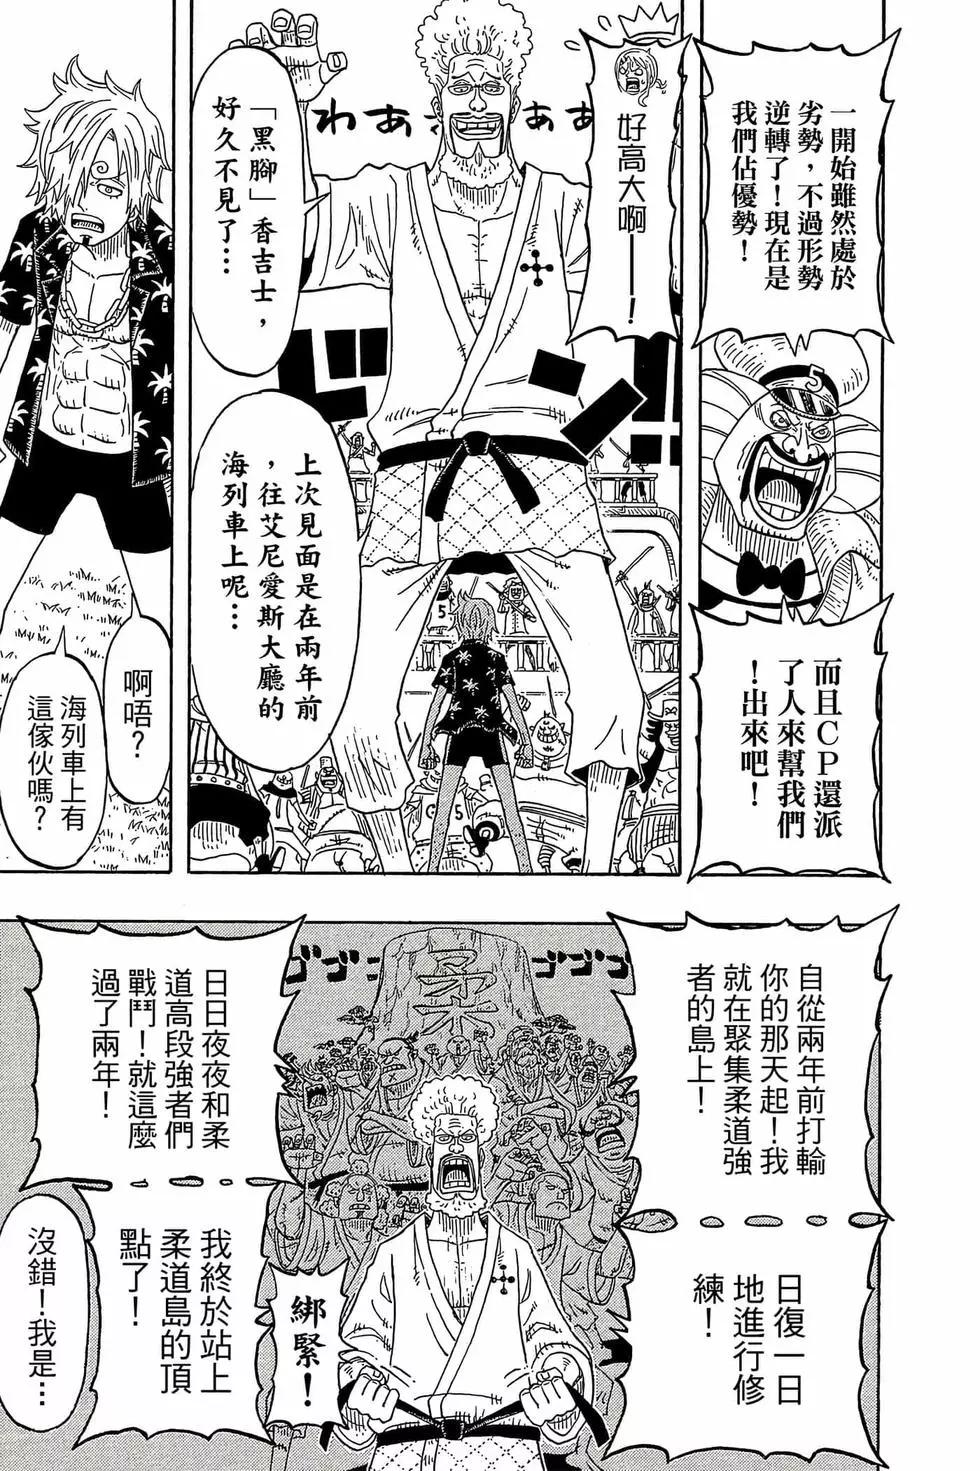 One piece party - 第03卷(4/4) - 2